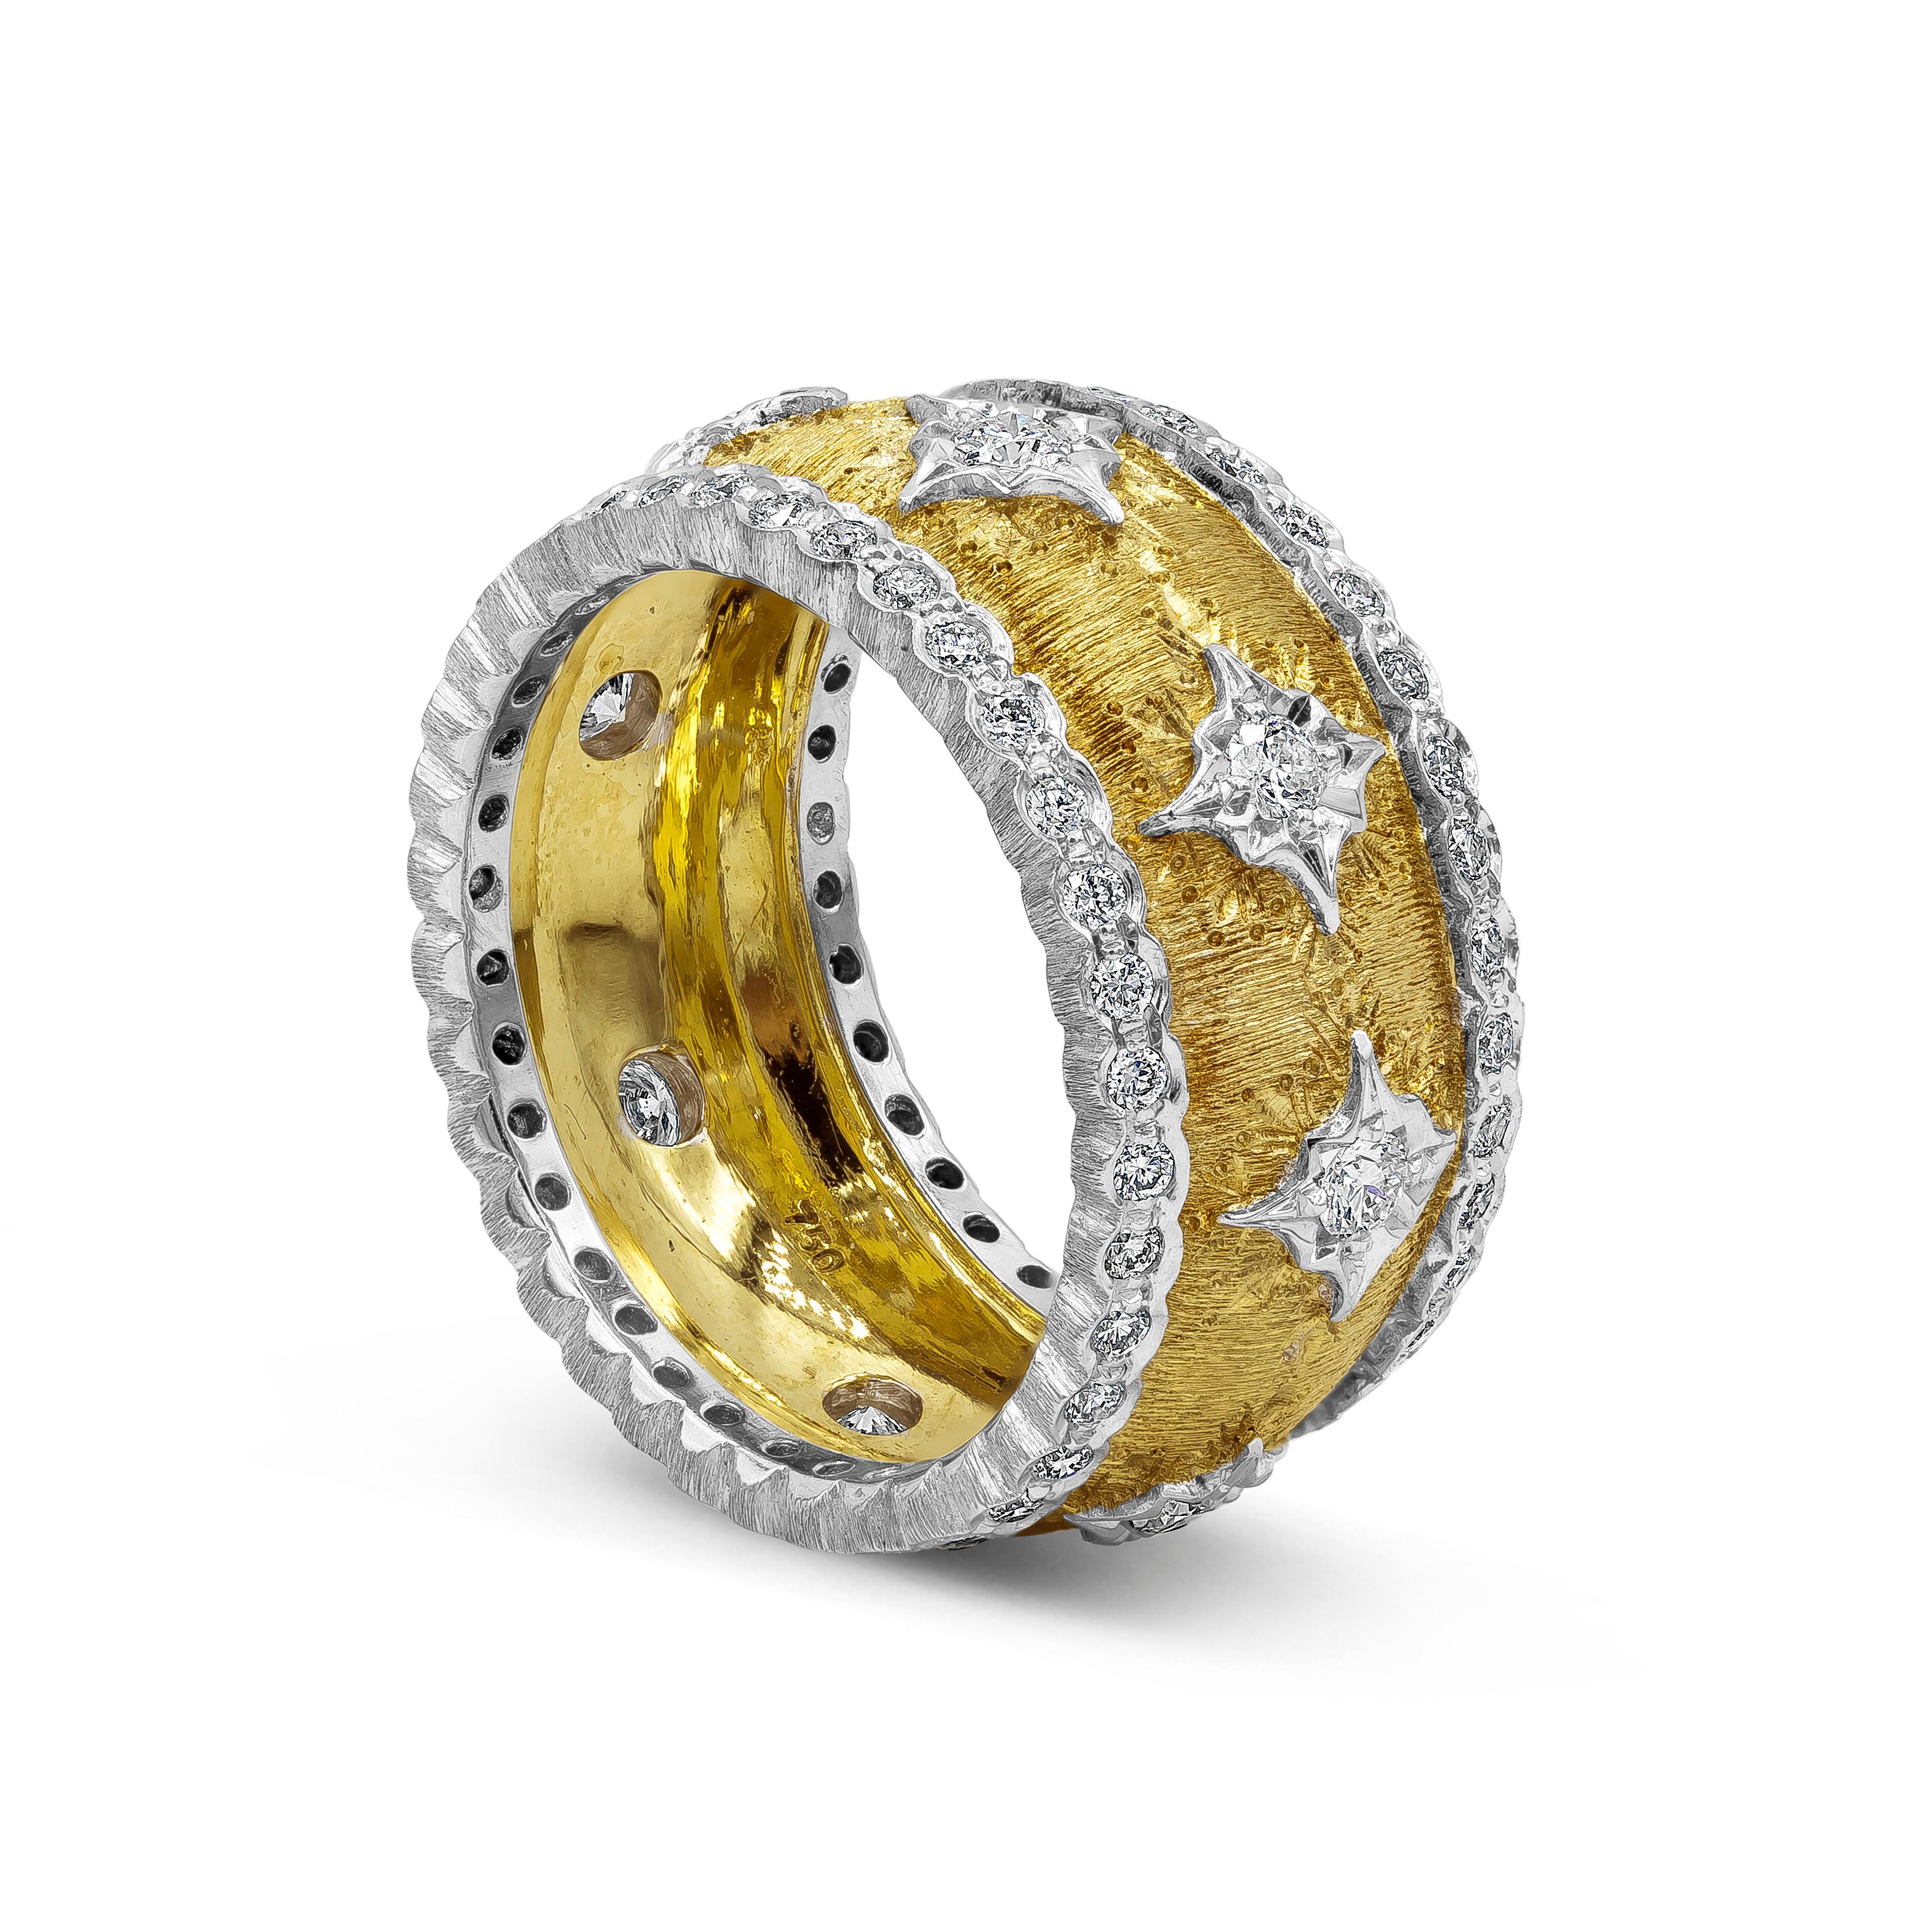 A fashionable fashion ring showcasing a brushed and domed yellow gold finish accented with round brilliant diamonds set in a starburst design made in white gold. More round diamonds bezel set on the edges of the ring. Diamonds weigh 0.76 carats